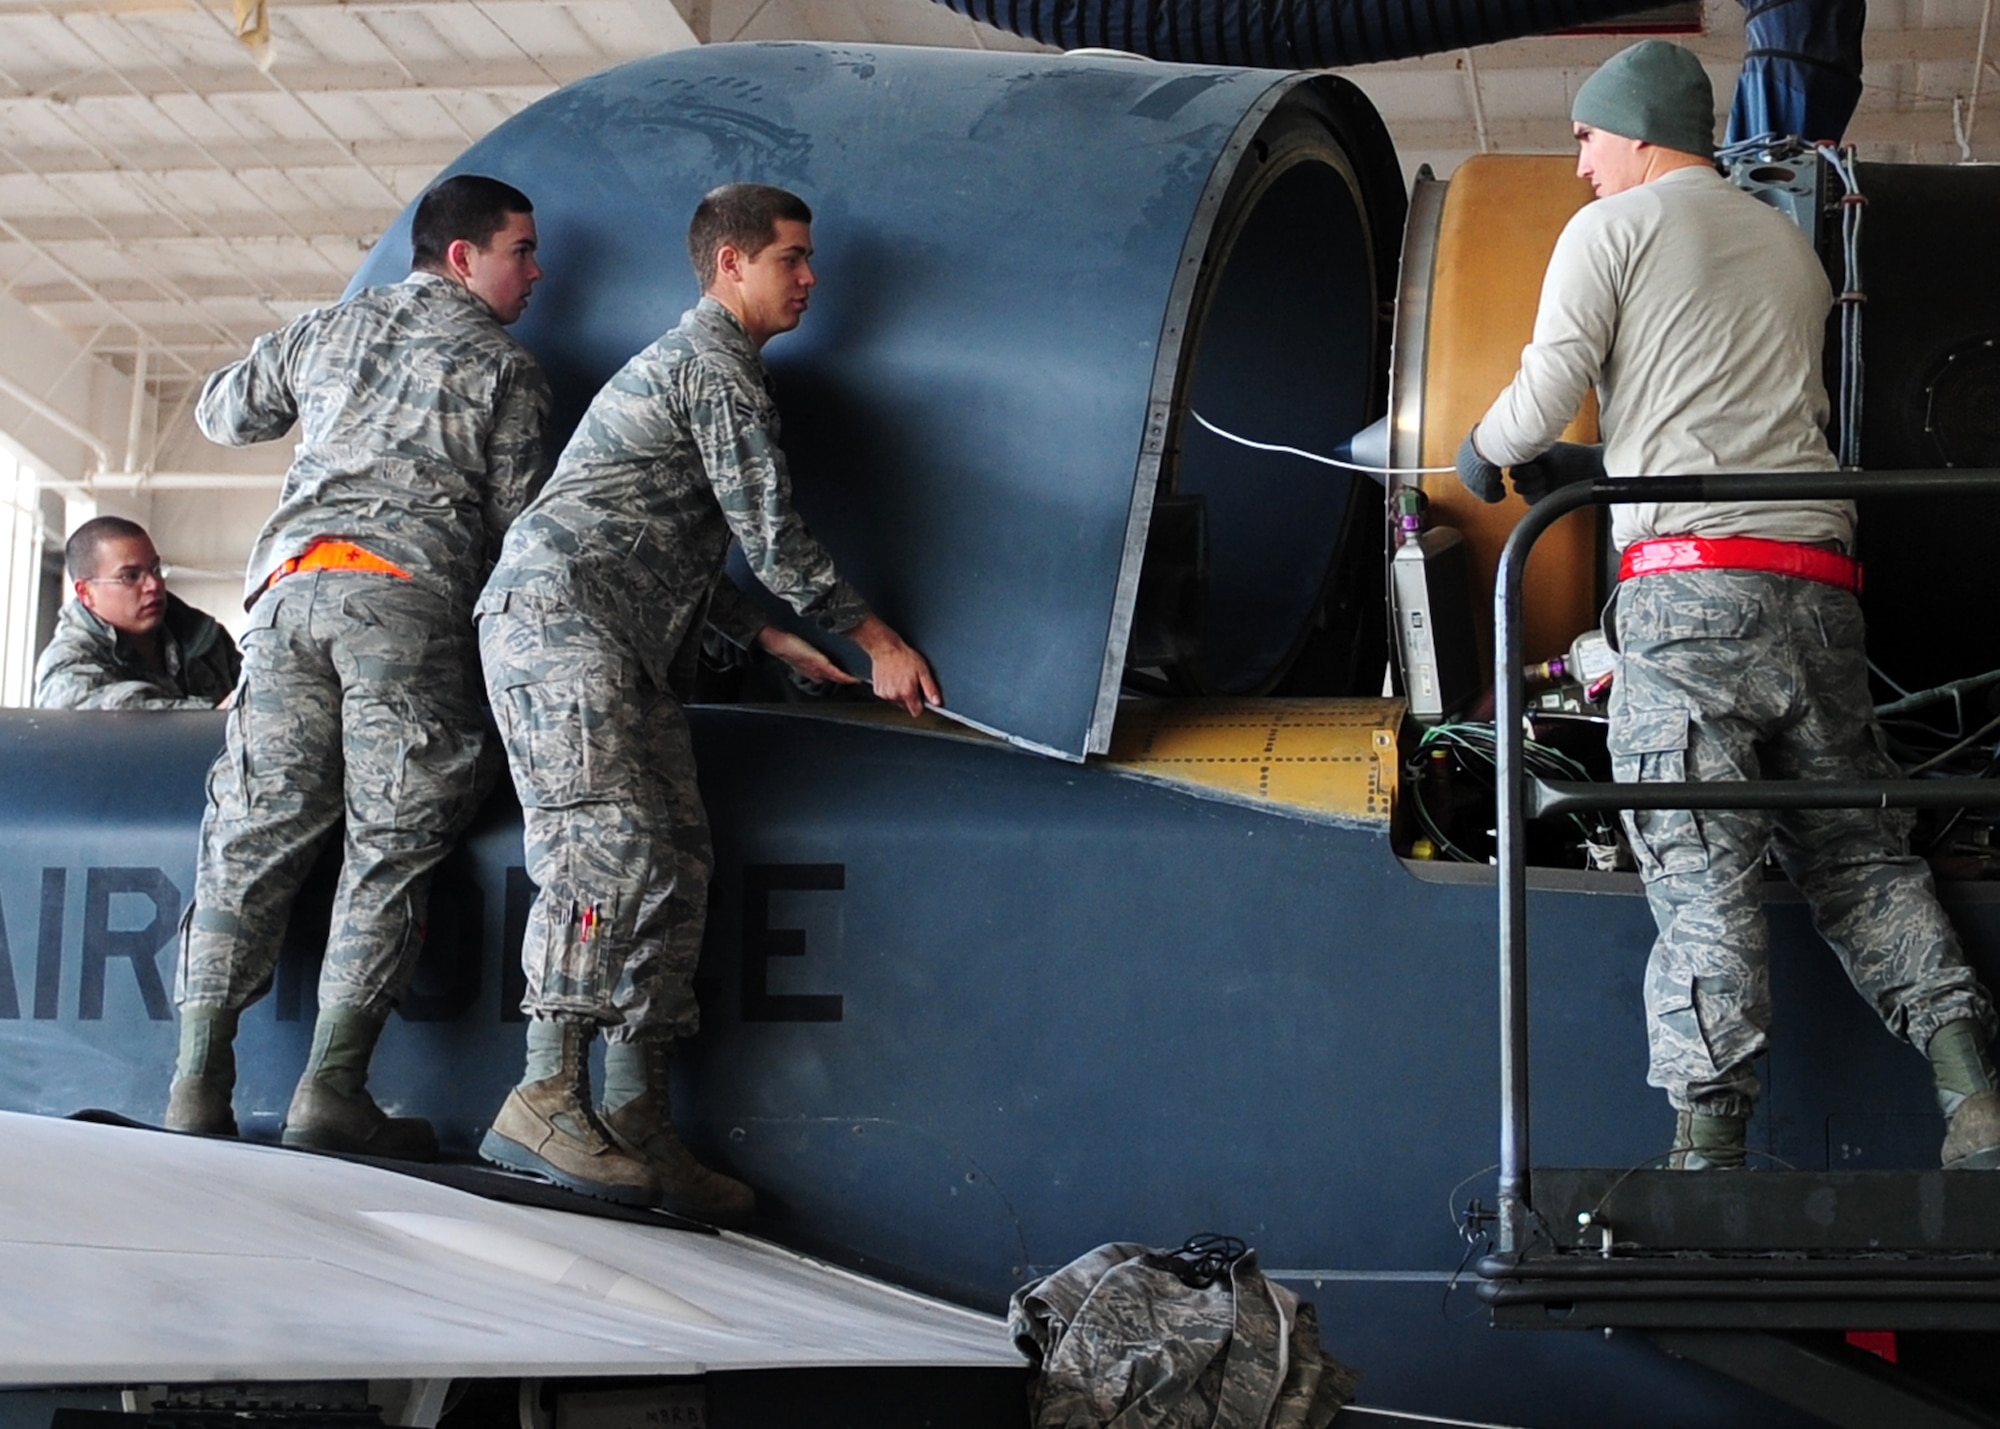 Airmen from the 9th Aircraft Maintenance Squadron place the forward nacelle air intake on an Air Force RQ-4 Global Hawk intelligence, surveillance and reconnaissance aircraft Dec. 19, 2012, at Beale Air Force Base, Calif. The part was repaired off the aircraft to ensure no dust or debris damaged internal parts. (U.S. Air Force photo by Senior Airman Shawn Nickel/Released)